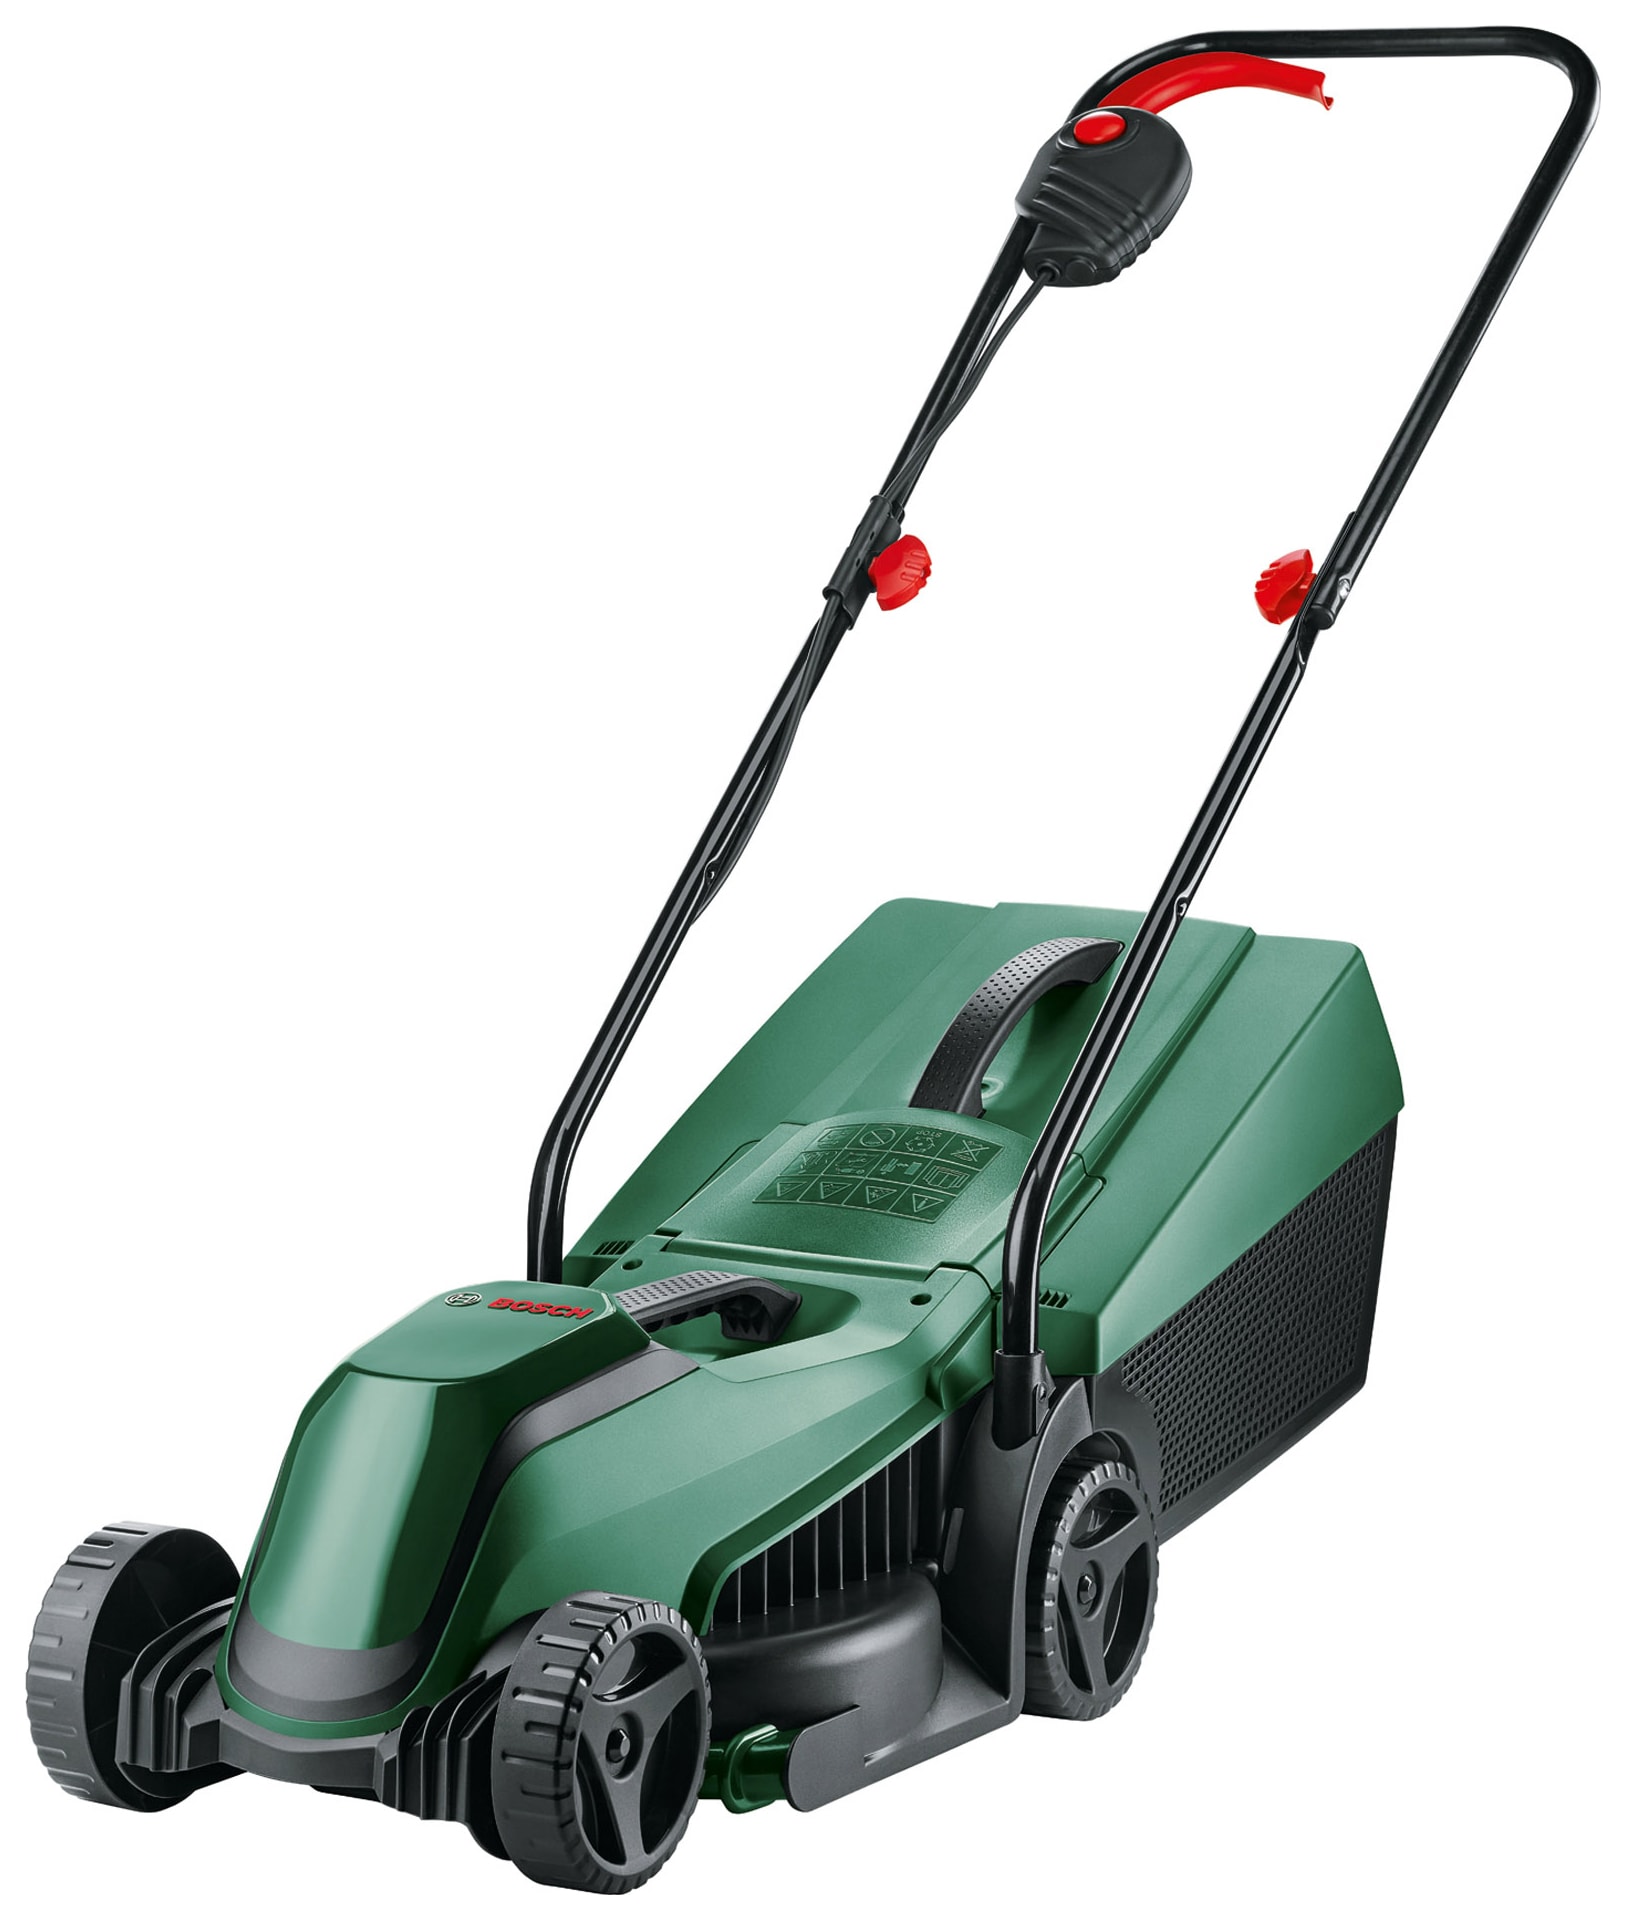 Bosch Easy Mower 18V-32 Cordless Lawn Mower with